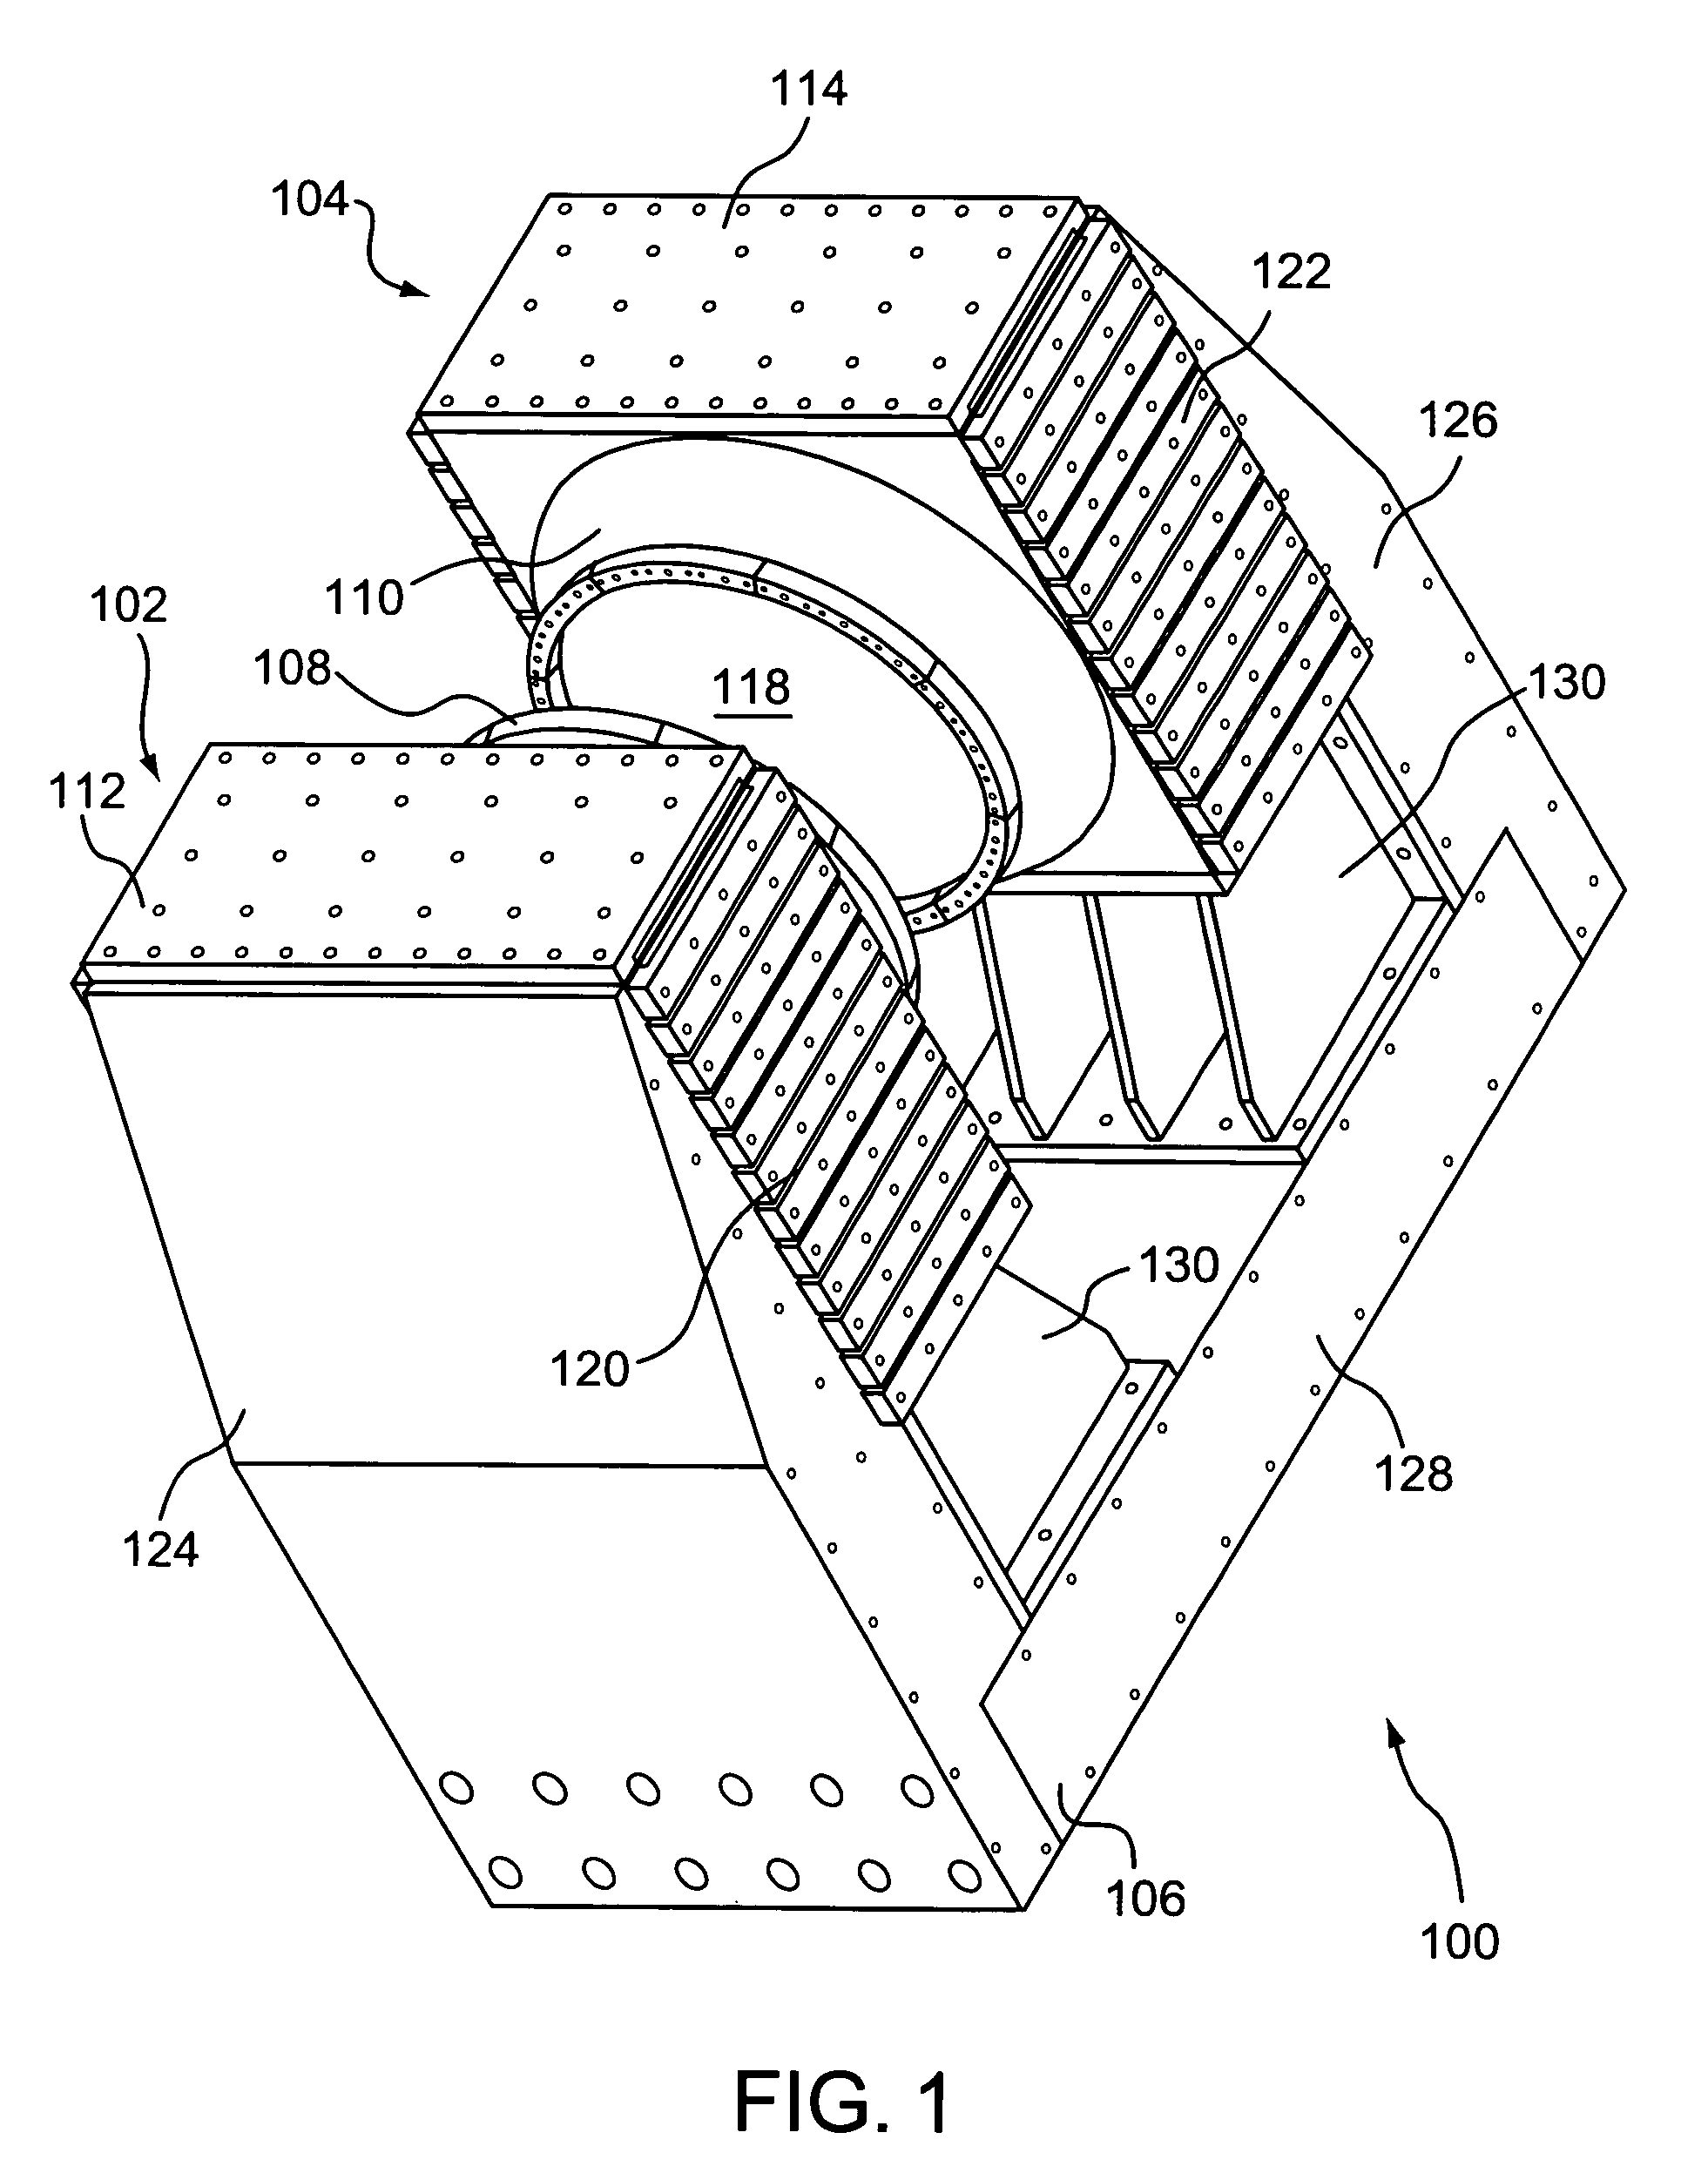 Magnet structure